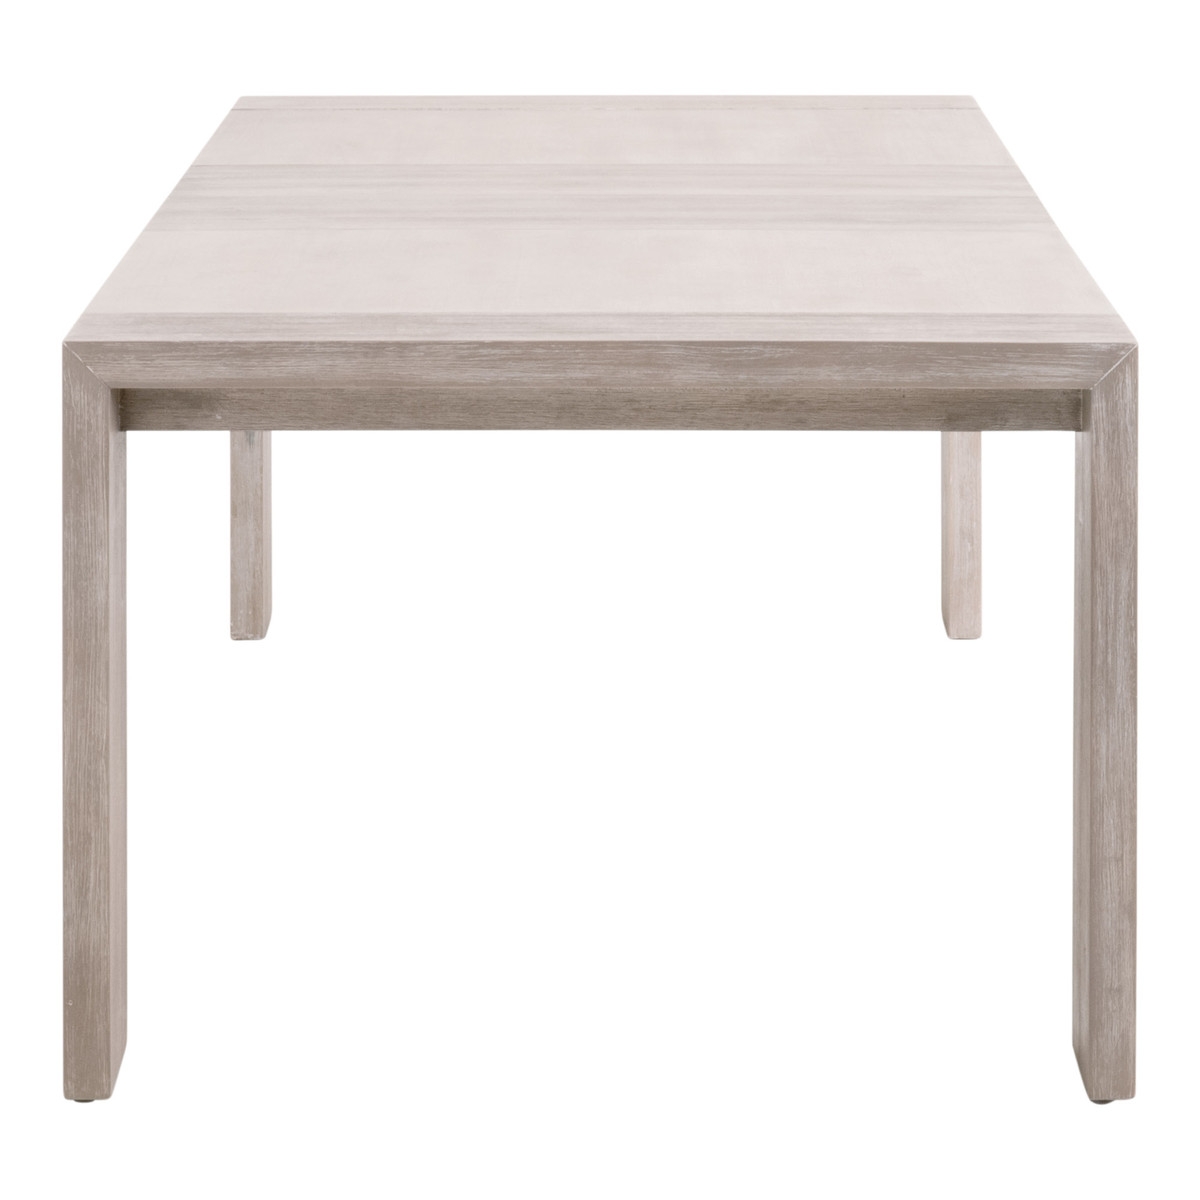 Tropea Extension Dining Table - Image 2